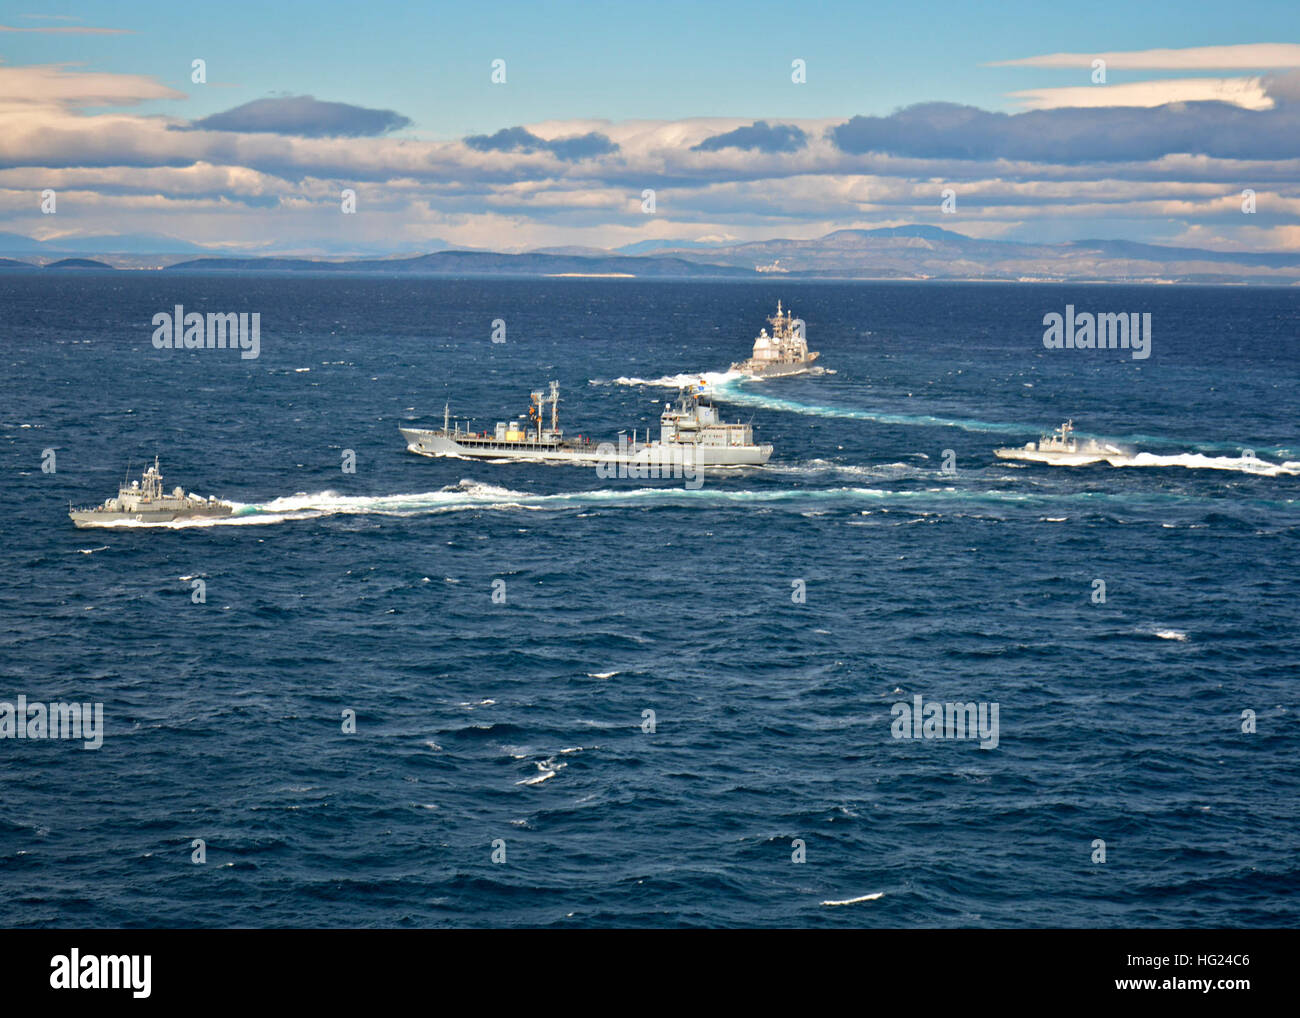 150210-N-IY633-175  ADRIATIC SEA (Feb. 10, 2015) The Standing NATO Maritime Group 2 (SNMG2) ships German navy oiler FGS Spessart (A 1442), center, and flagship guided-missile cruiser USS Vicksburg (CG 69), top, participate in  replenishment-at-sea maneuvers between SNMG2 and Croatian missile boats Dmitar Zvonimir (RTOP-12), left, and Šibenik (RTOP-21), right. SNMG2 ships exercised with the Croatian Navy after a port visit to Split, Croatia. SNMG2 is a multinational integrated force that projects a constant and visible reminder of the Alliance’s solidarity and cohesion afloat. (U.S. Navy photo  Stock Photo